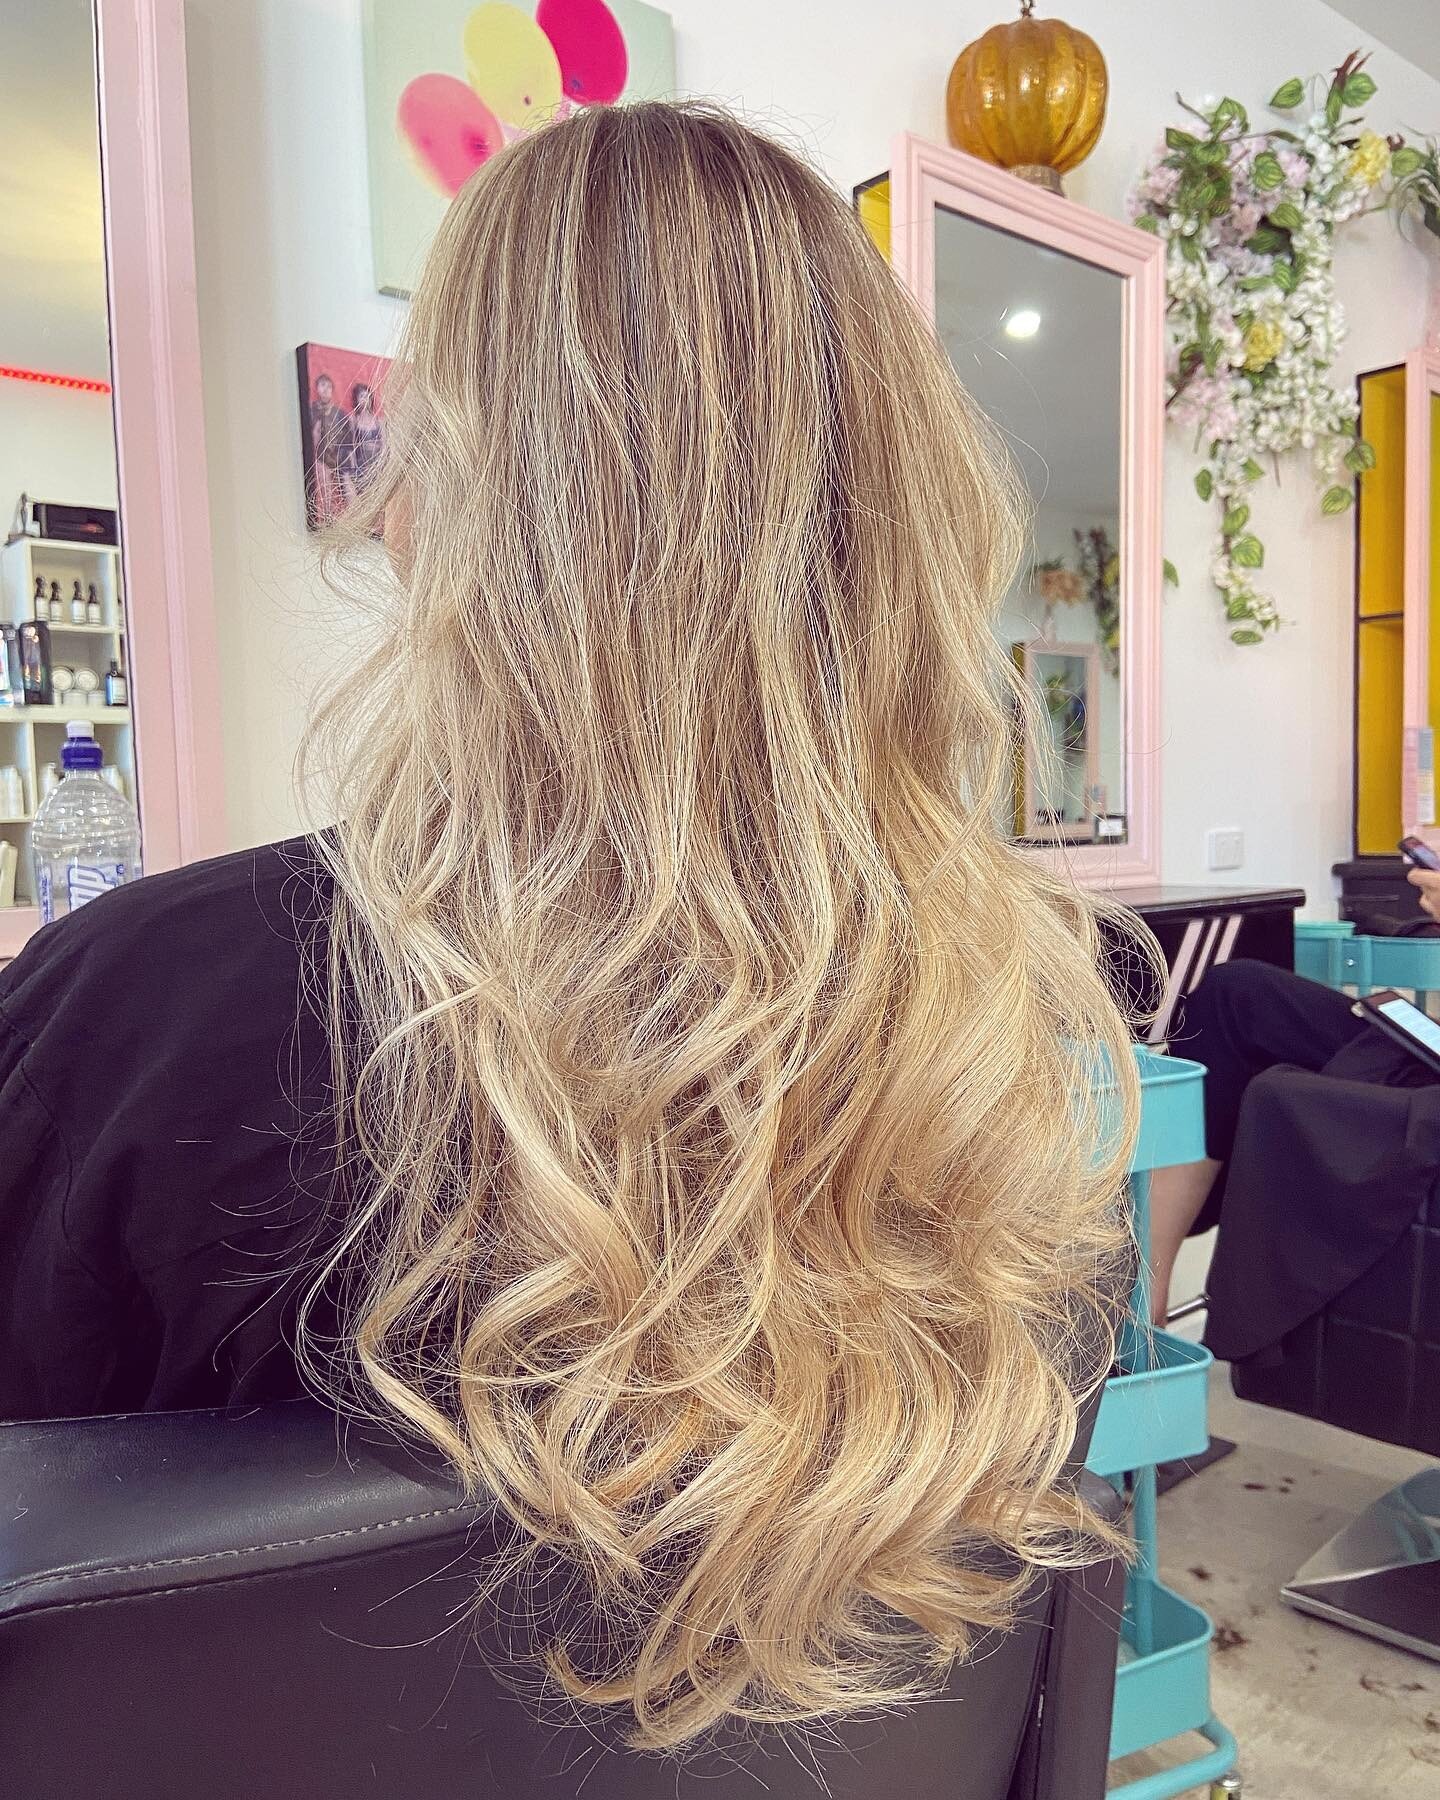 Haven&rsquo;t posted in a while as the salon has been super busy, so thank you to all the clients who have supported us through the last 2 years and stayed loyal through the craziness. Blondes are what we do and we do them well. Blonde hair should be